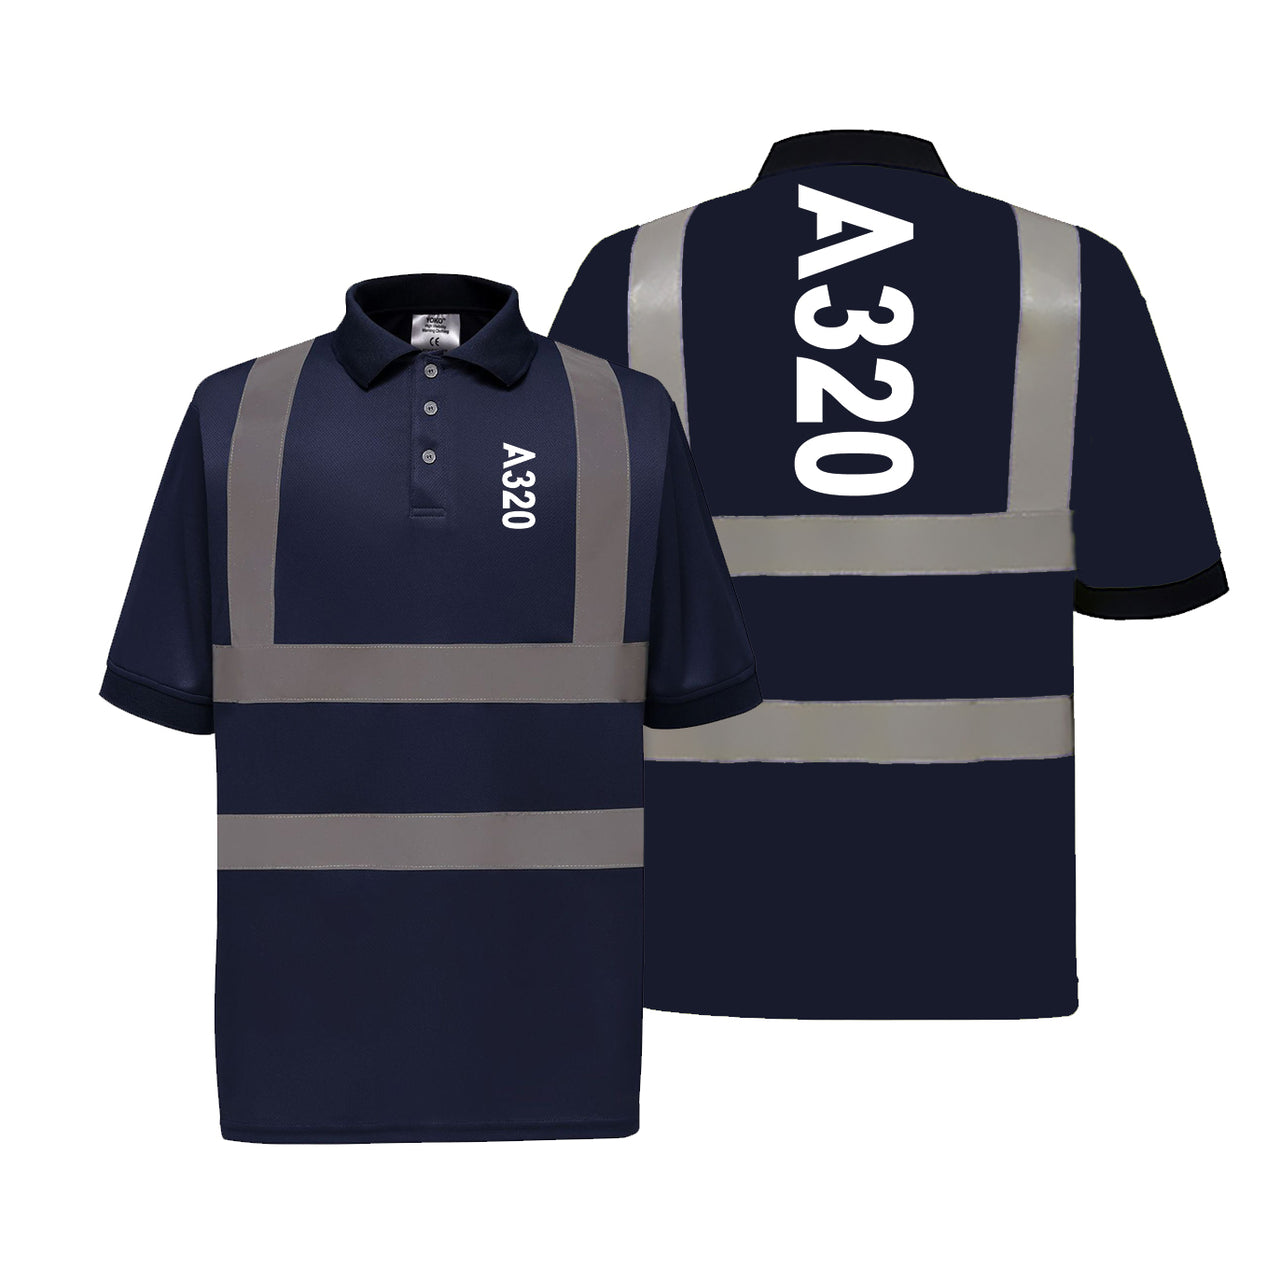 A320 Text Designed Reflective Polo T-Shirts